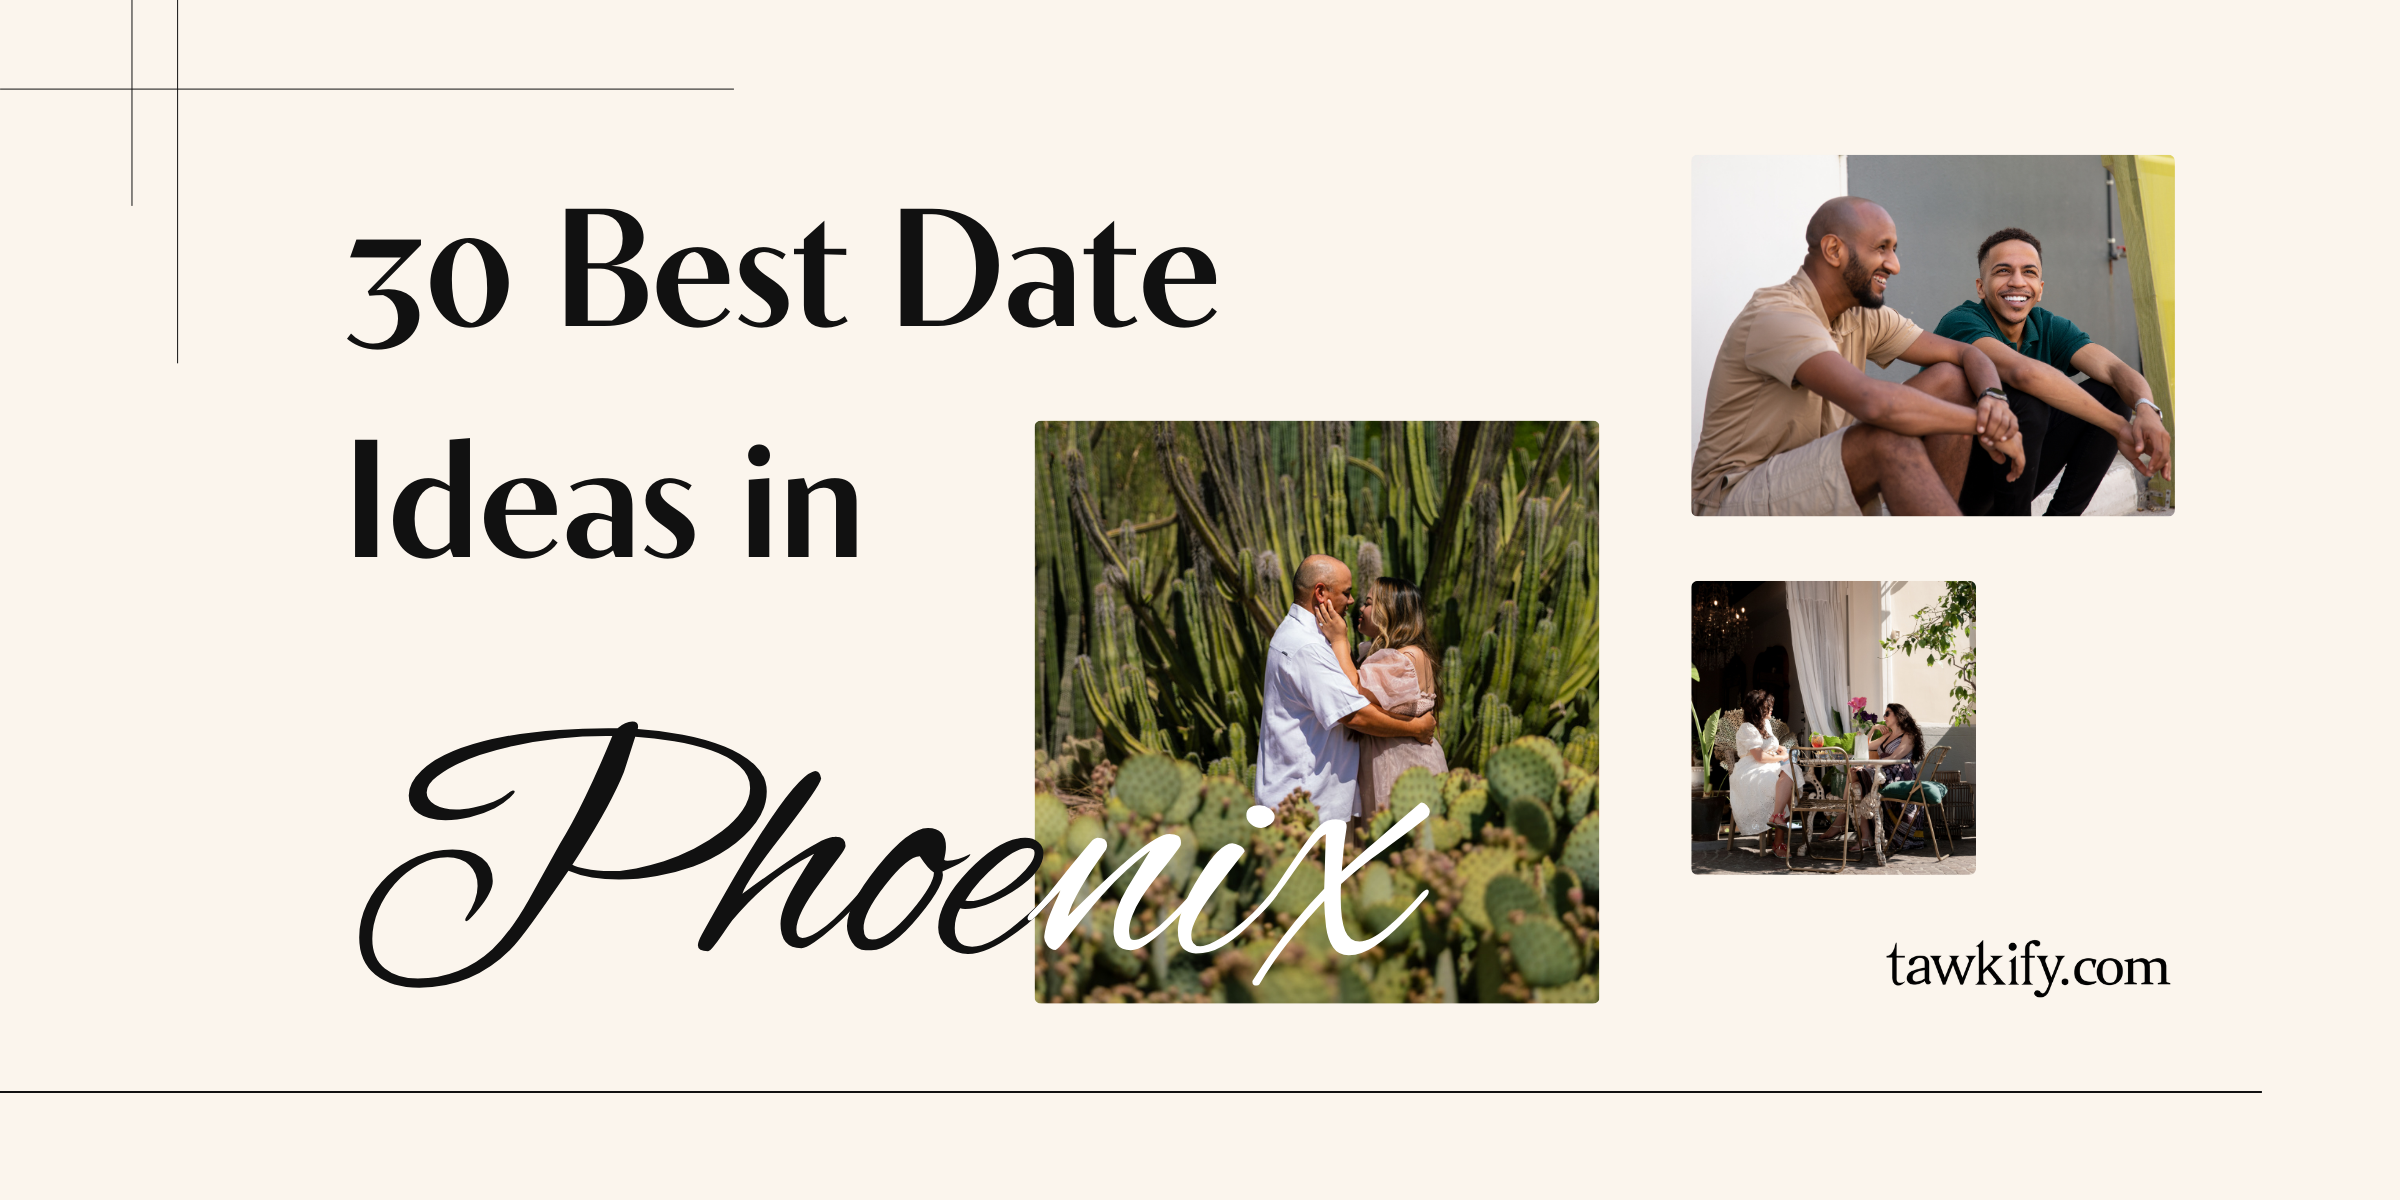 Need some inspiration when it comes to brainstorming date ideas in Phoenix? Check out our suggestions for the best date spots in PHX!